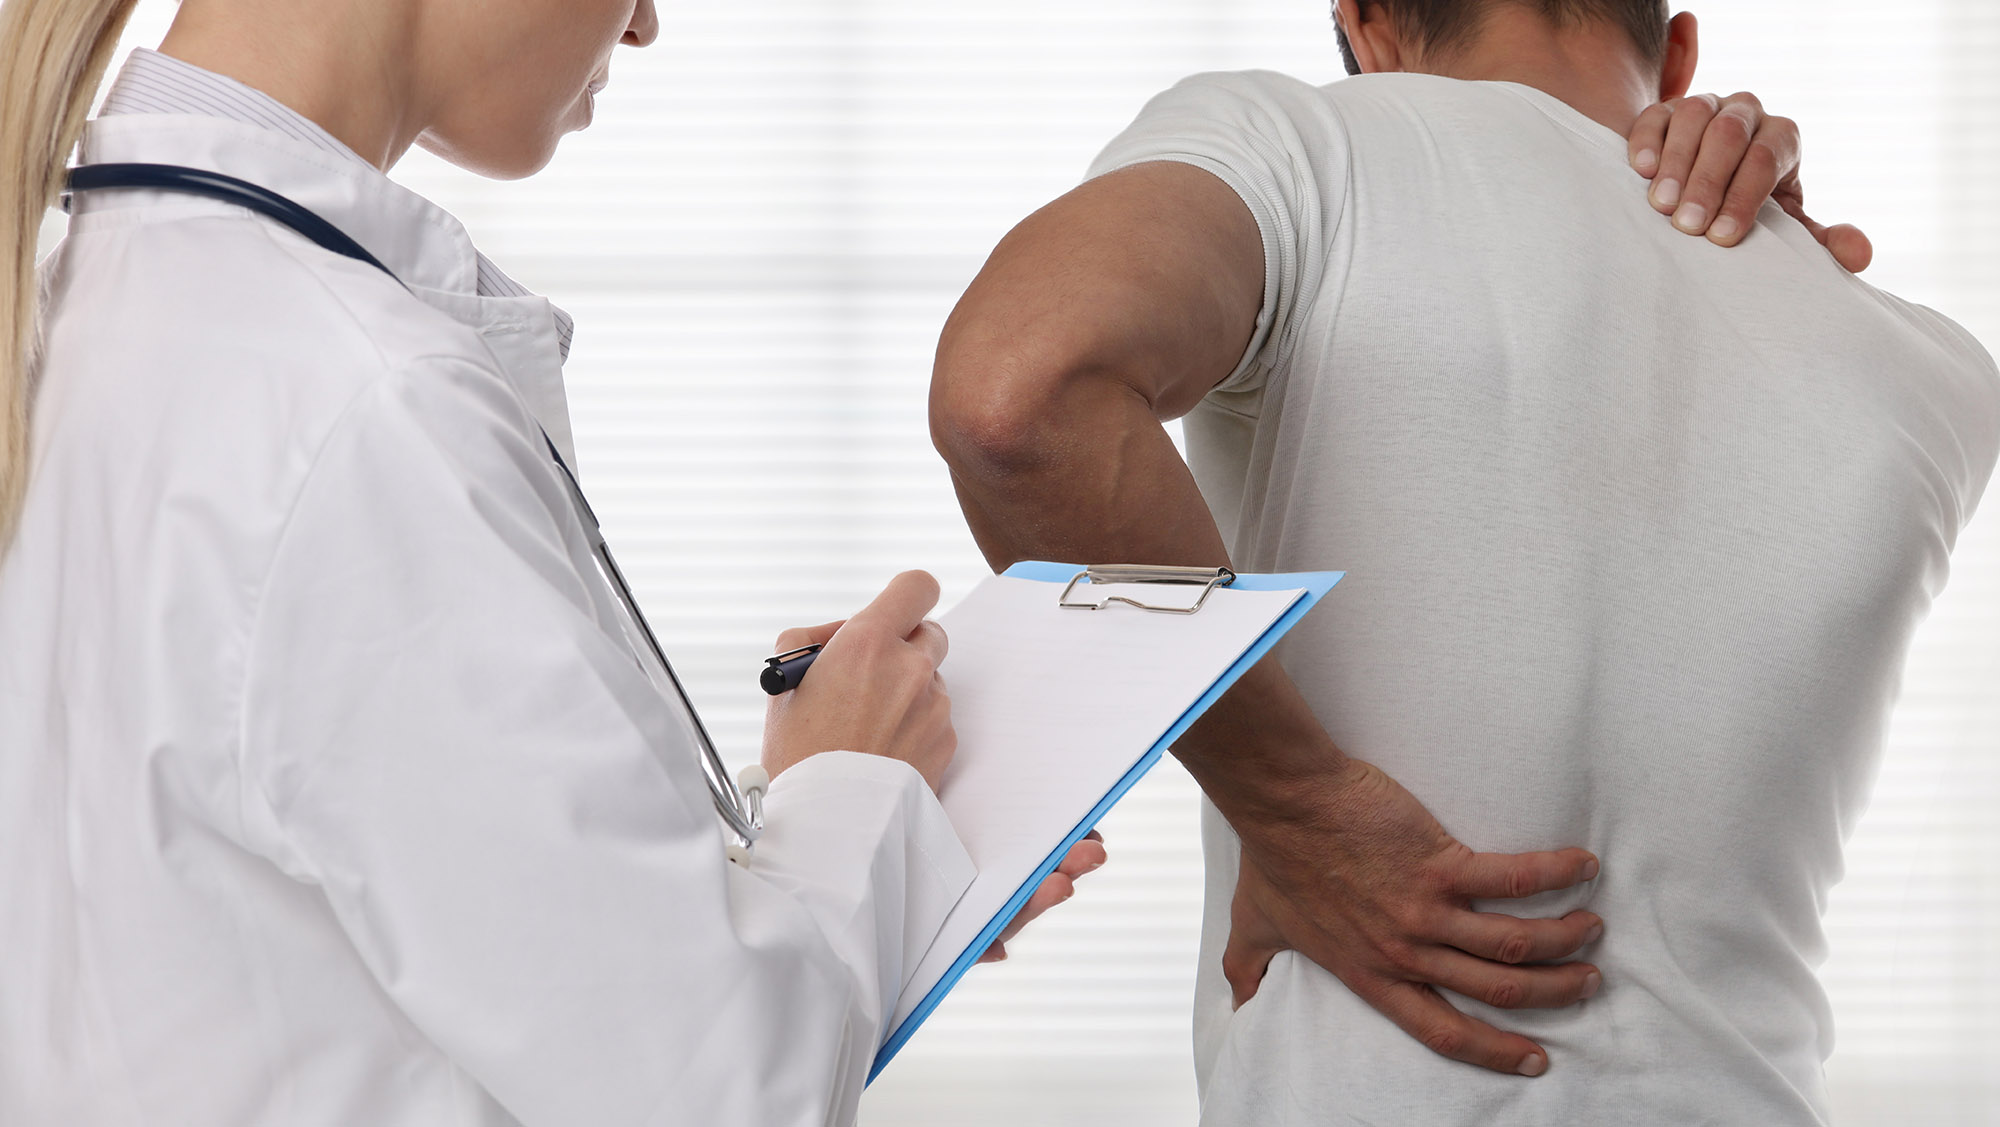 injured spine, back injury claims Wakefield Wakefield Personal Injury Claim Solicitors